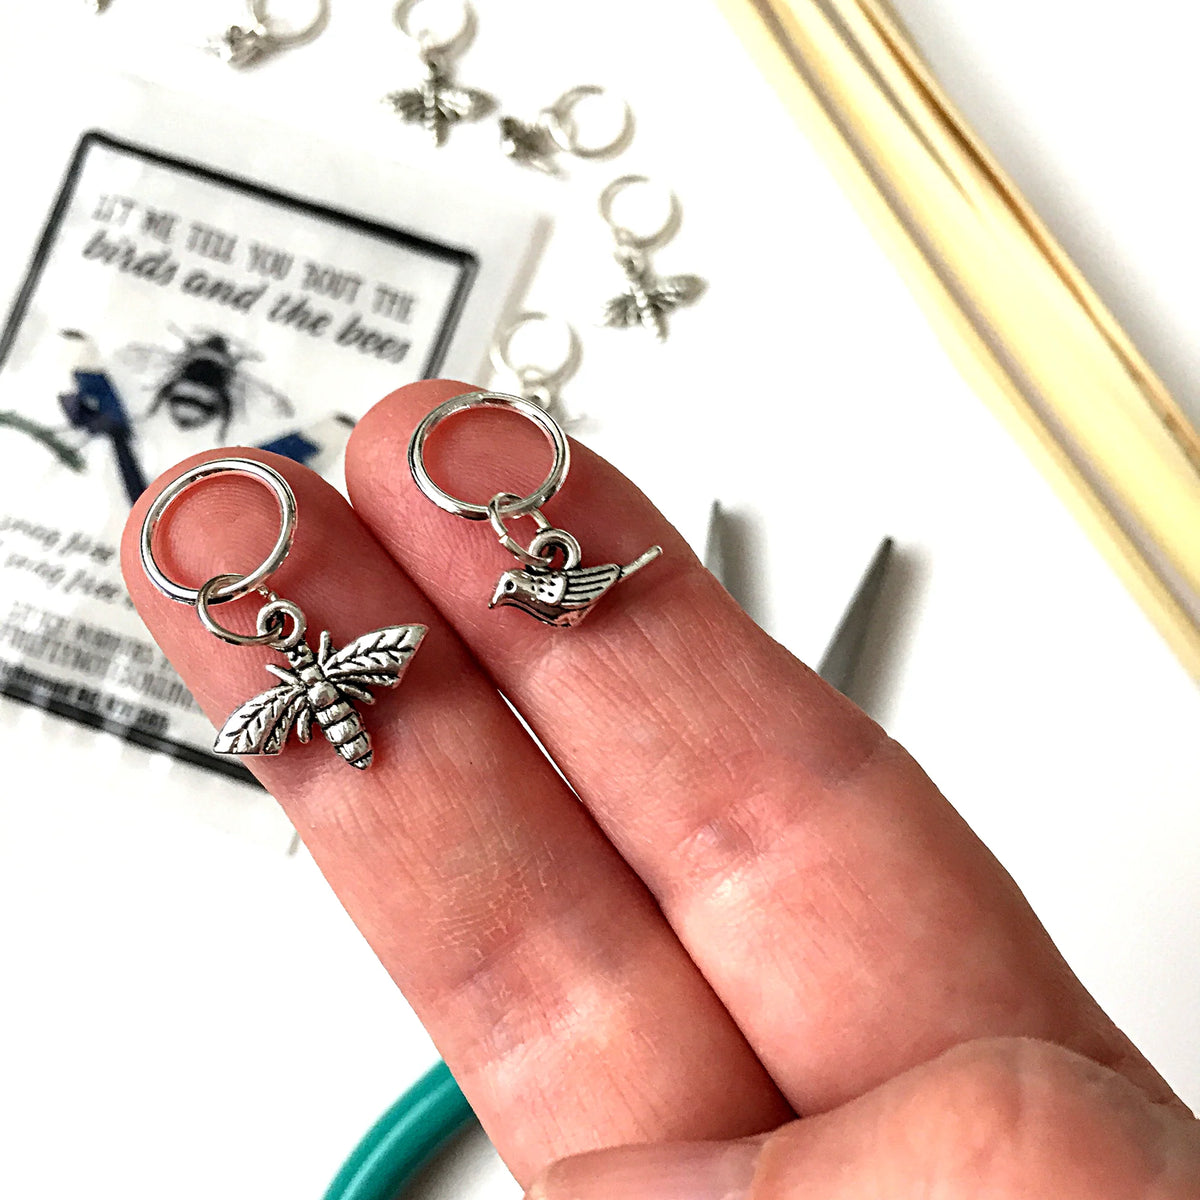 Stitch Markers - Birds and Bees